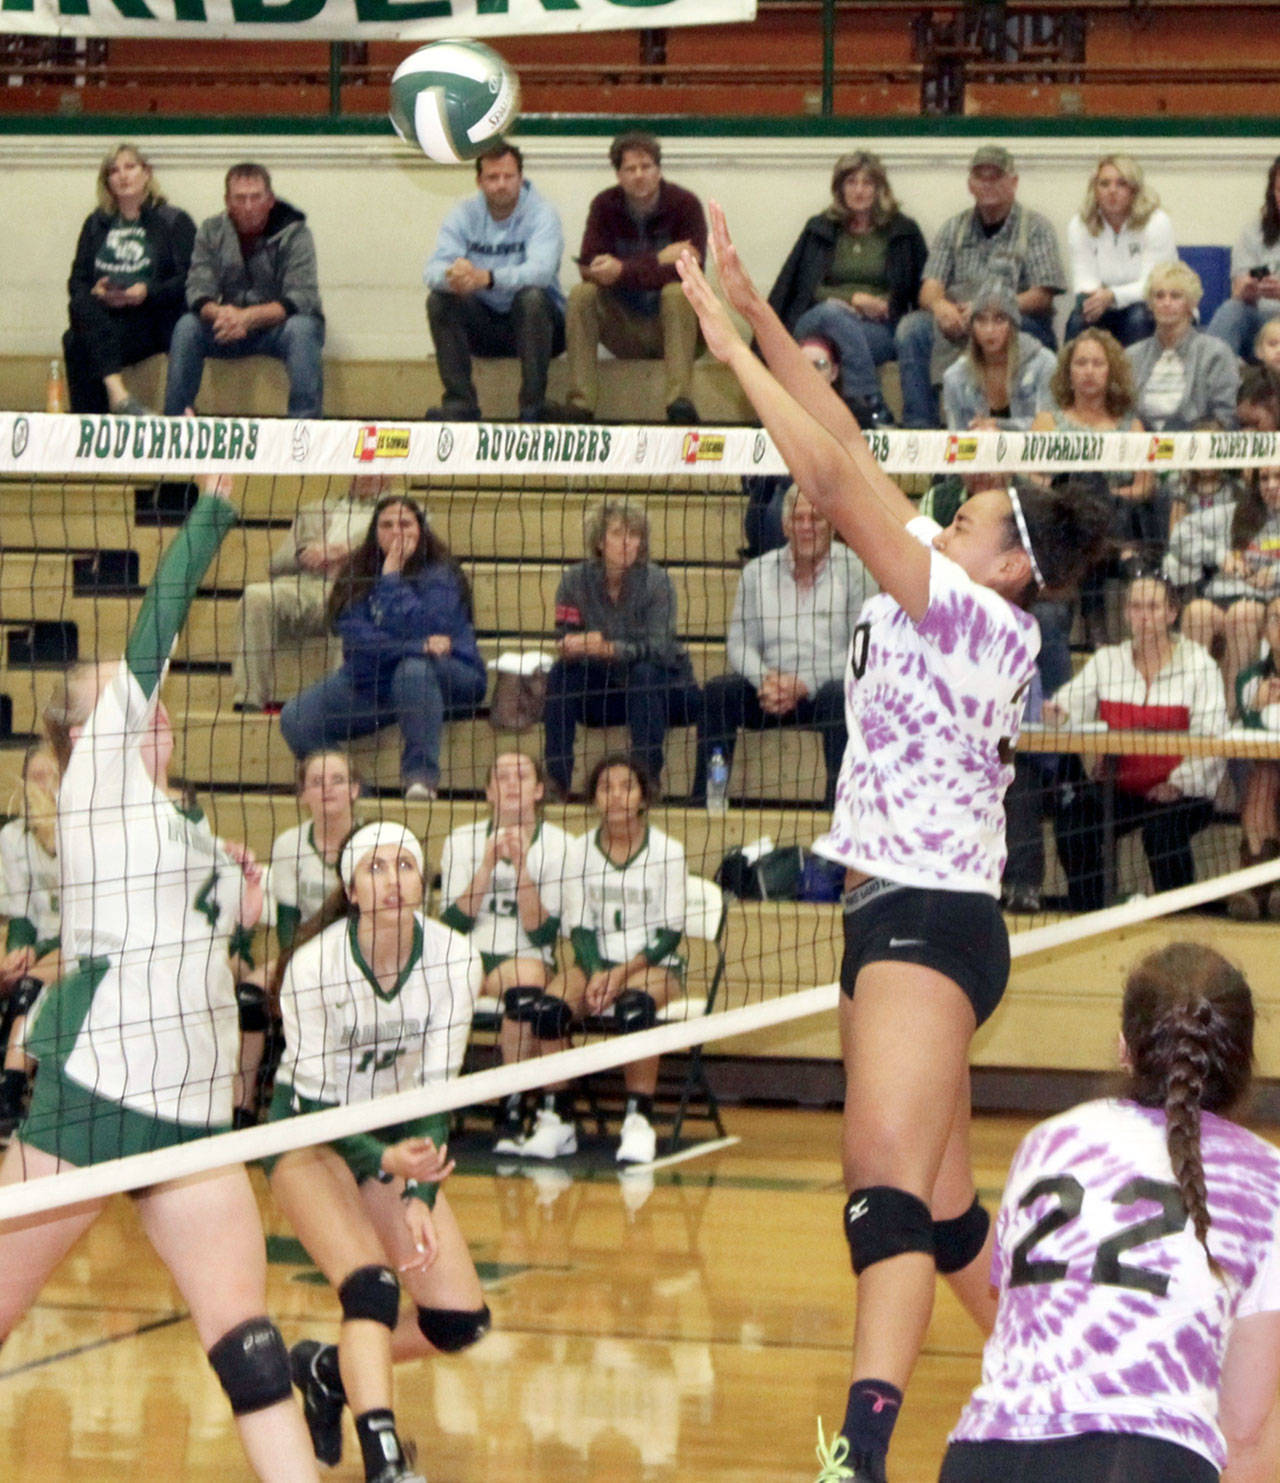 Sequim’s Jayla Julmist blocks a shot at the net against Port Angeles on Tuesday evening as teammate Tayler Breckenridge (22) is ready for a possible return. Julmist finished the match with seven blocks. Port Angeles players are McKenzie Musalek (4) and Jaida Wood (13). (Dave Logan /for Peninsula Daily News)